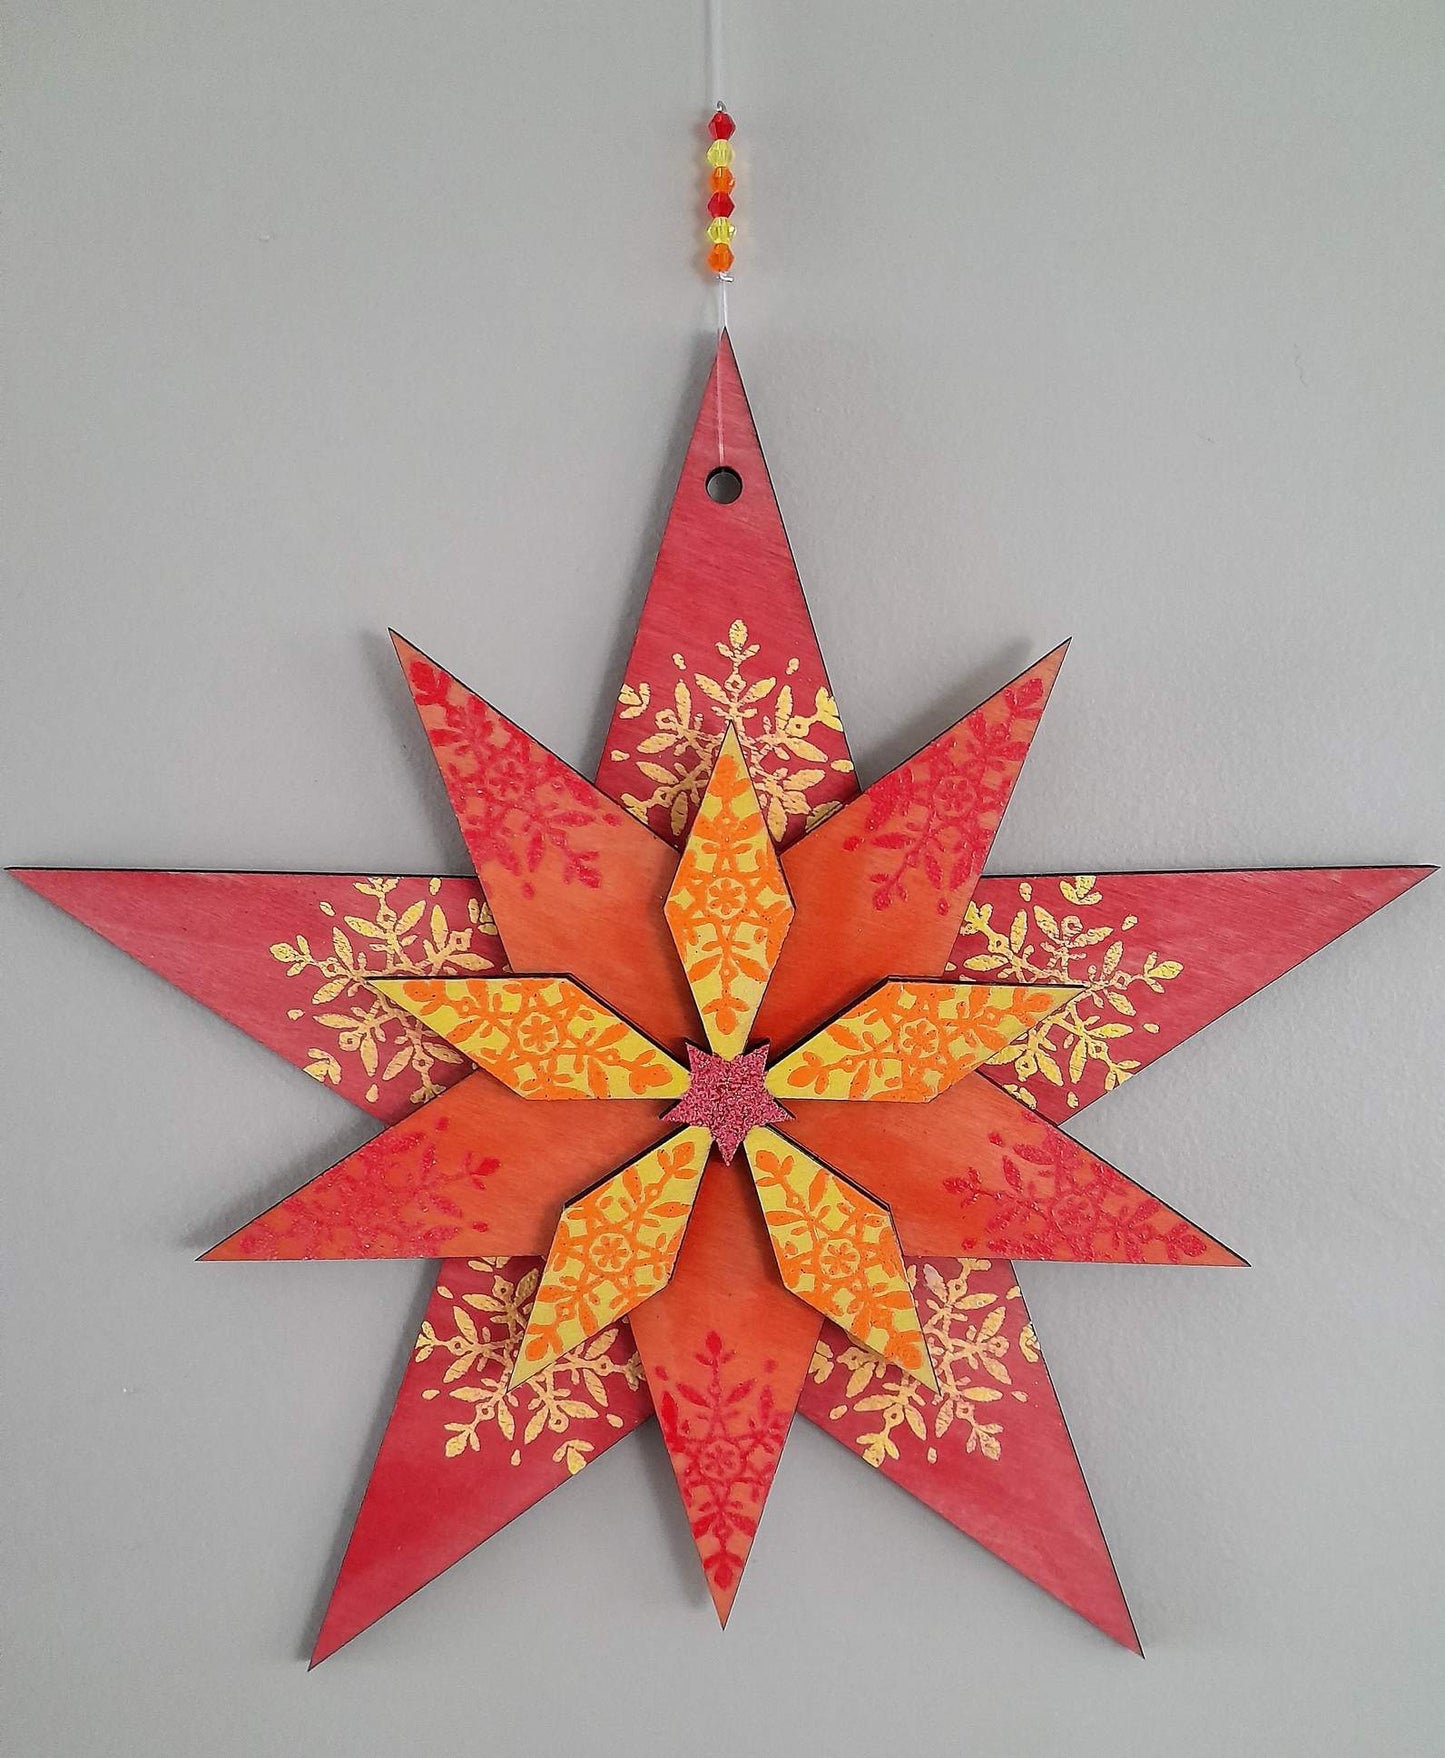 Large Handmade wooden star - red, orange and yellow